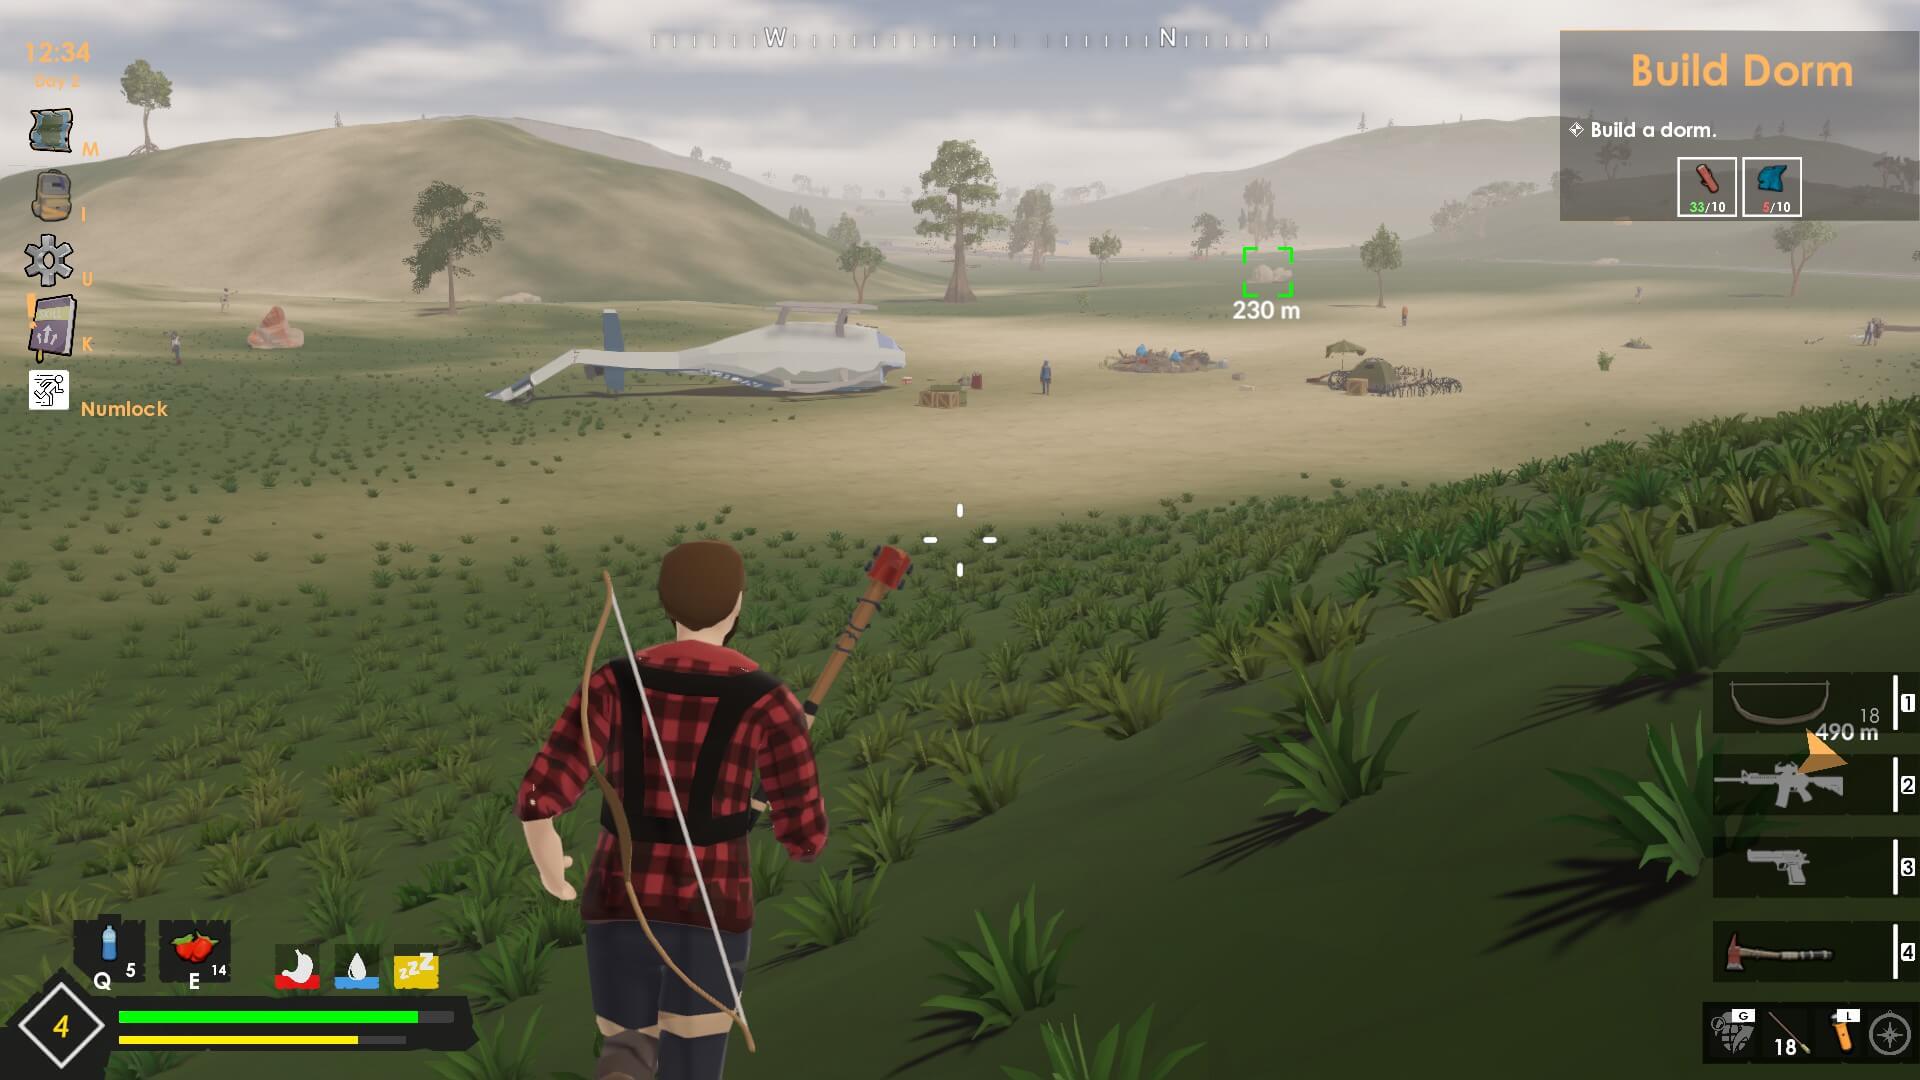 I'm approaching a downed chopper. a couple of zombies can be seen in the background.